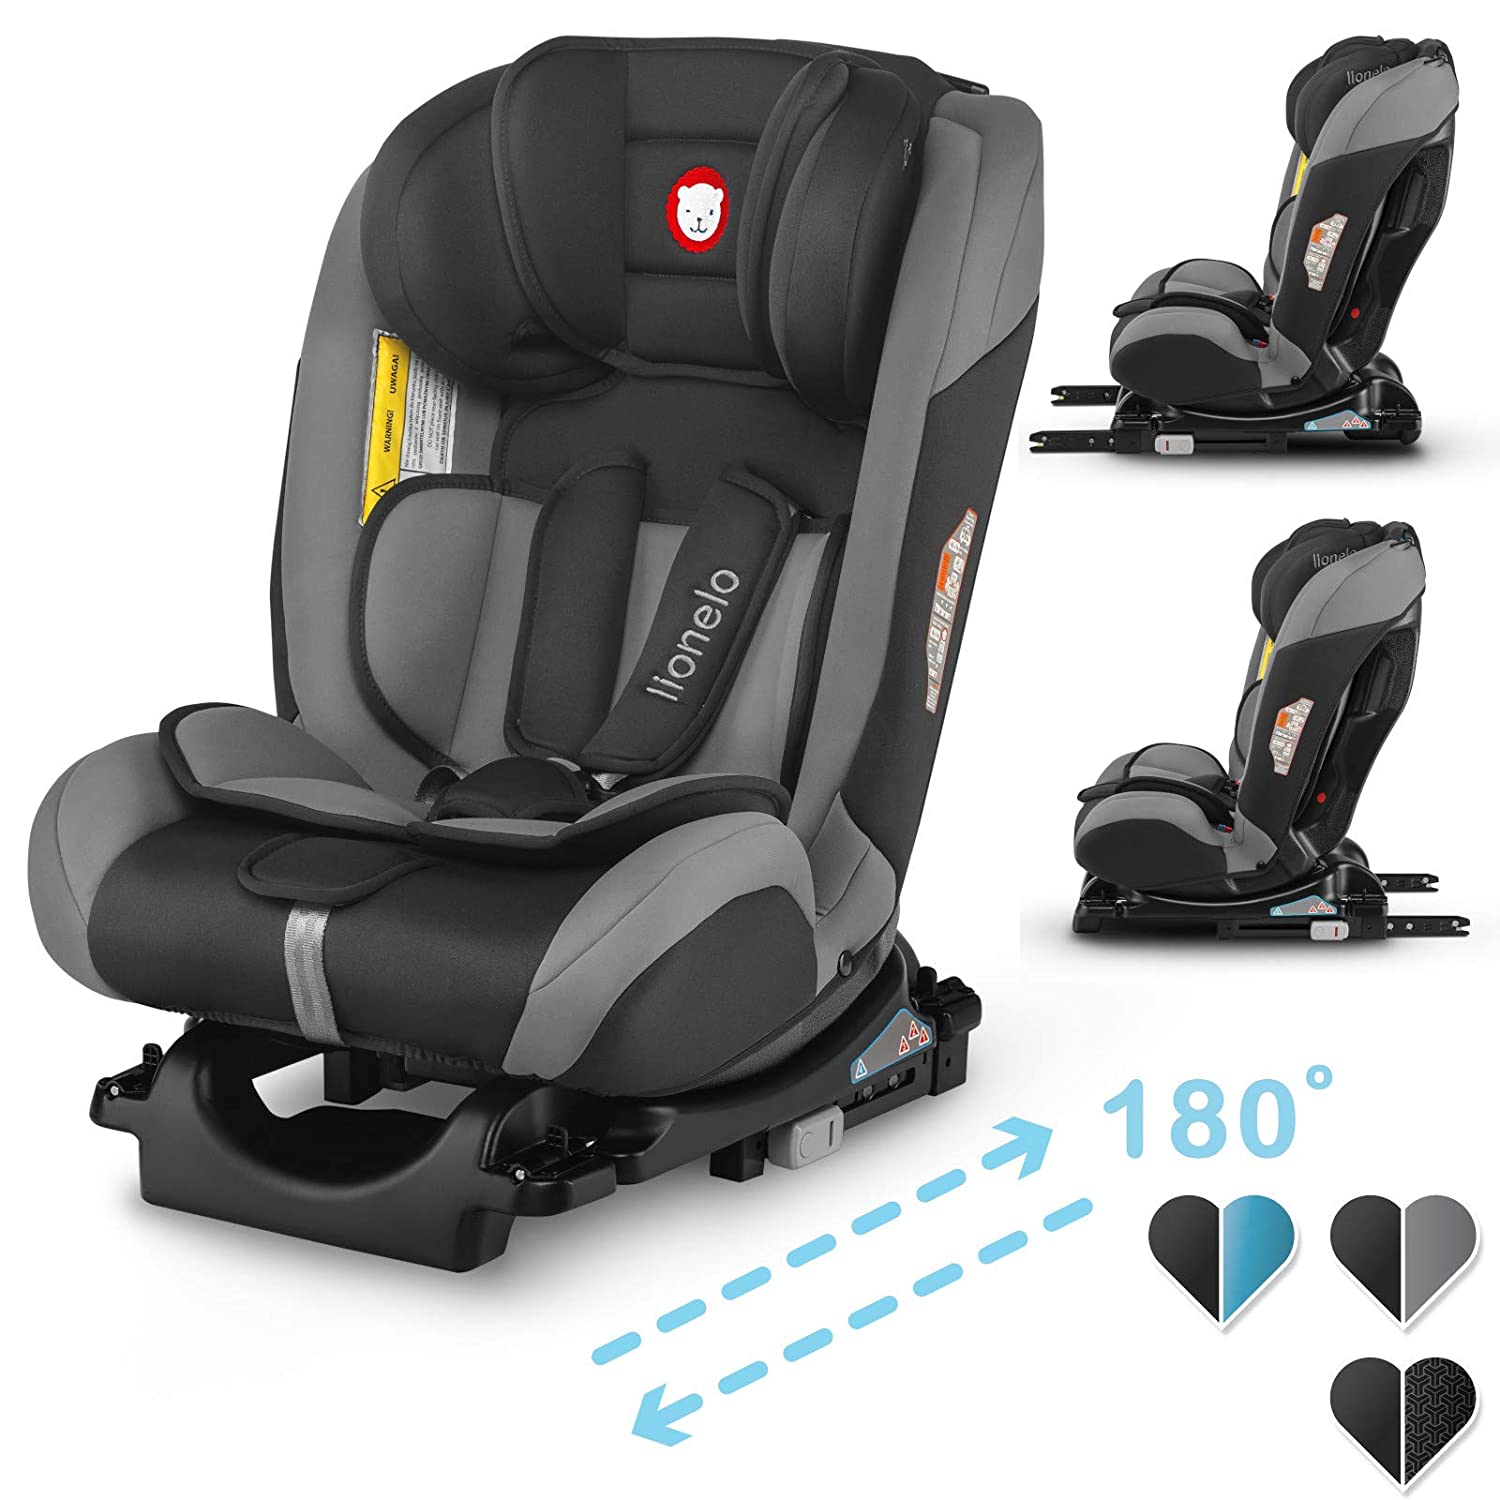 Lionelo Sander Isofix Forward-Facing or Rear-Facing Child Car Seat with Top Tether Group 0 1 2 3 from Birth to 36 kg ECE R 44 04 TÜV SÜD